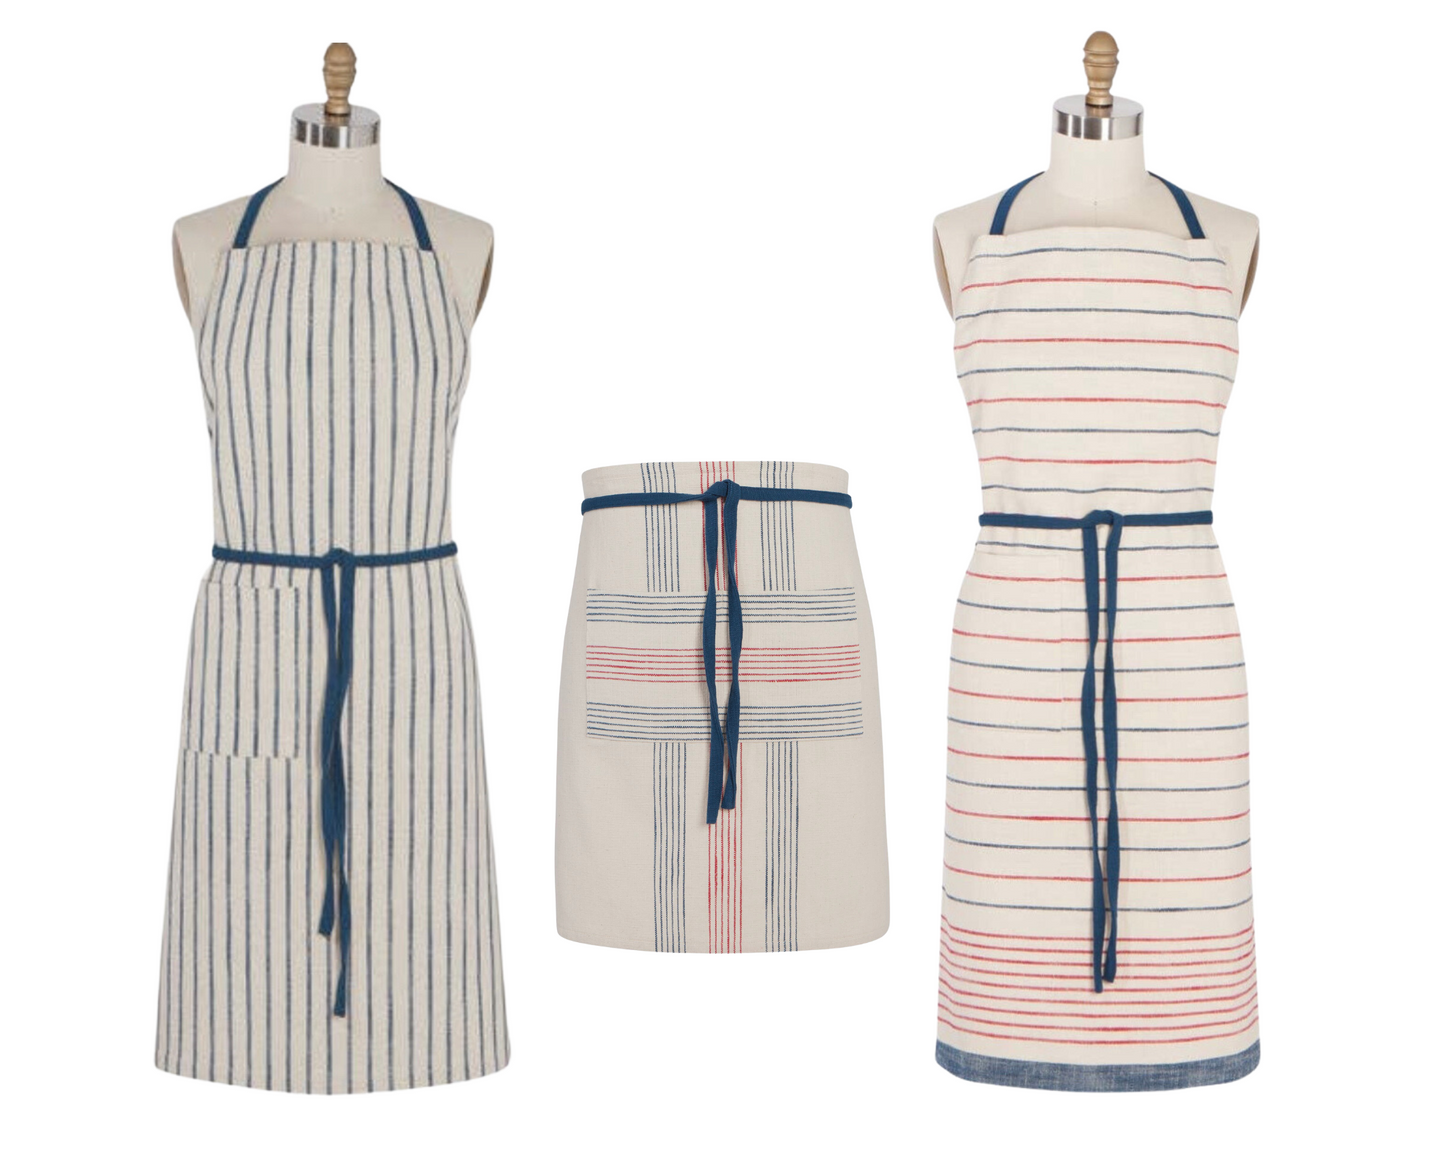 French Aprons